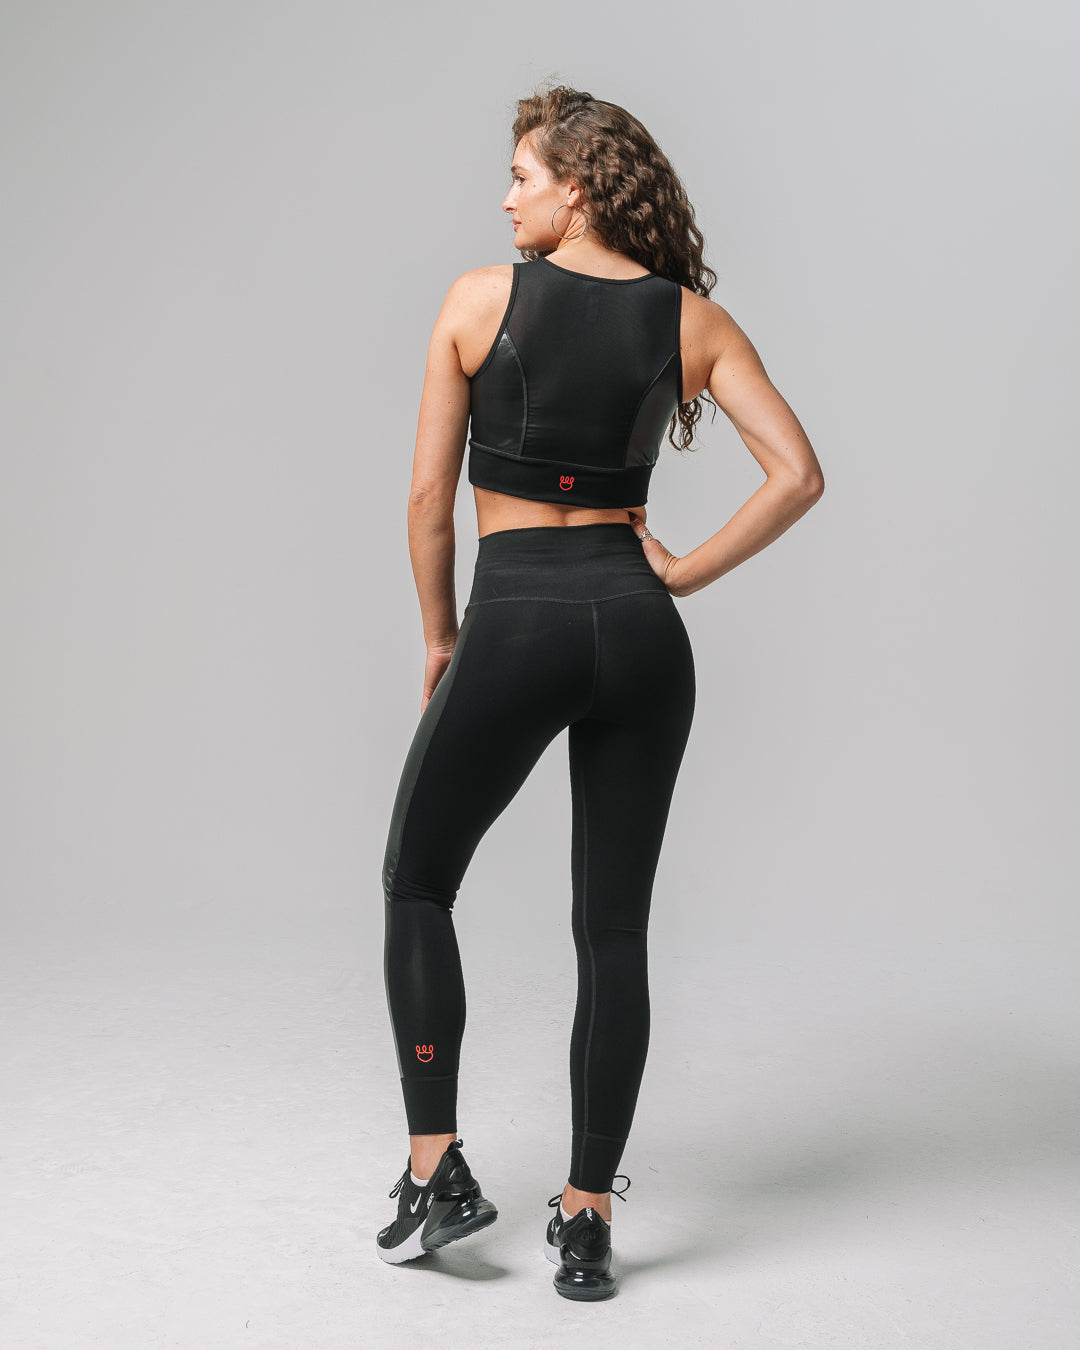 KADYLUXE® recycled faux leather legging in color black back view